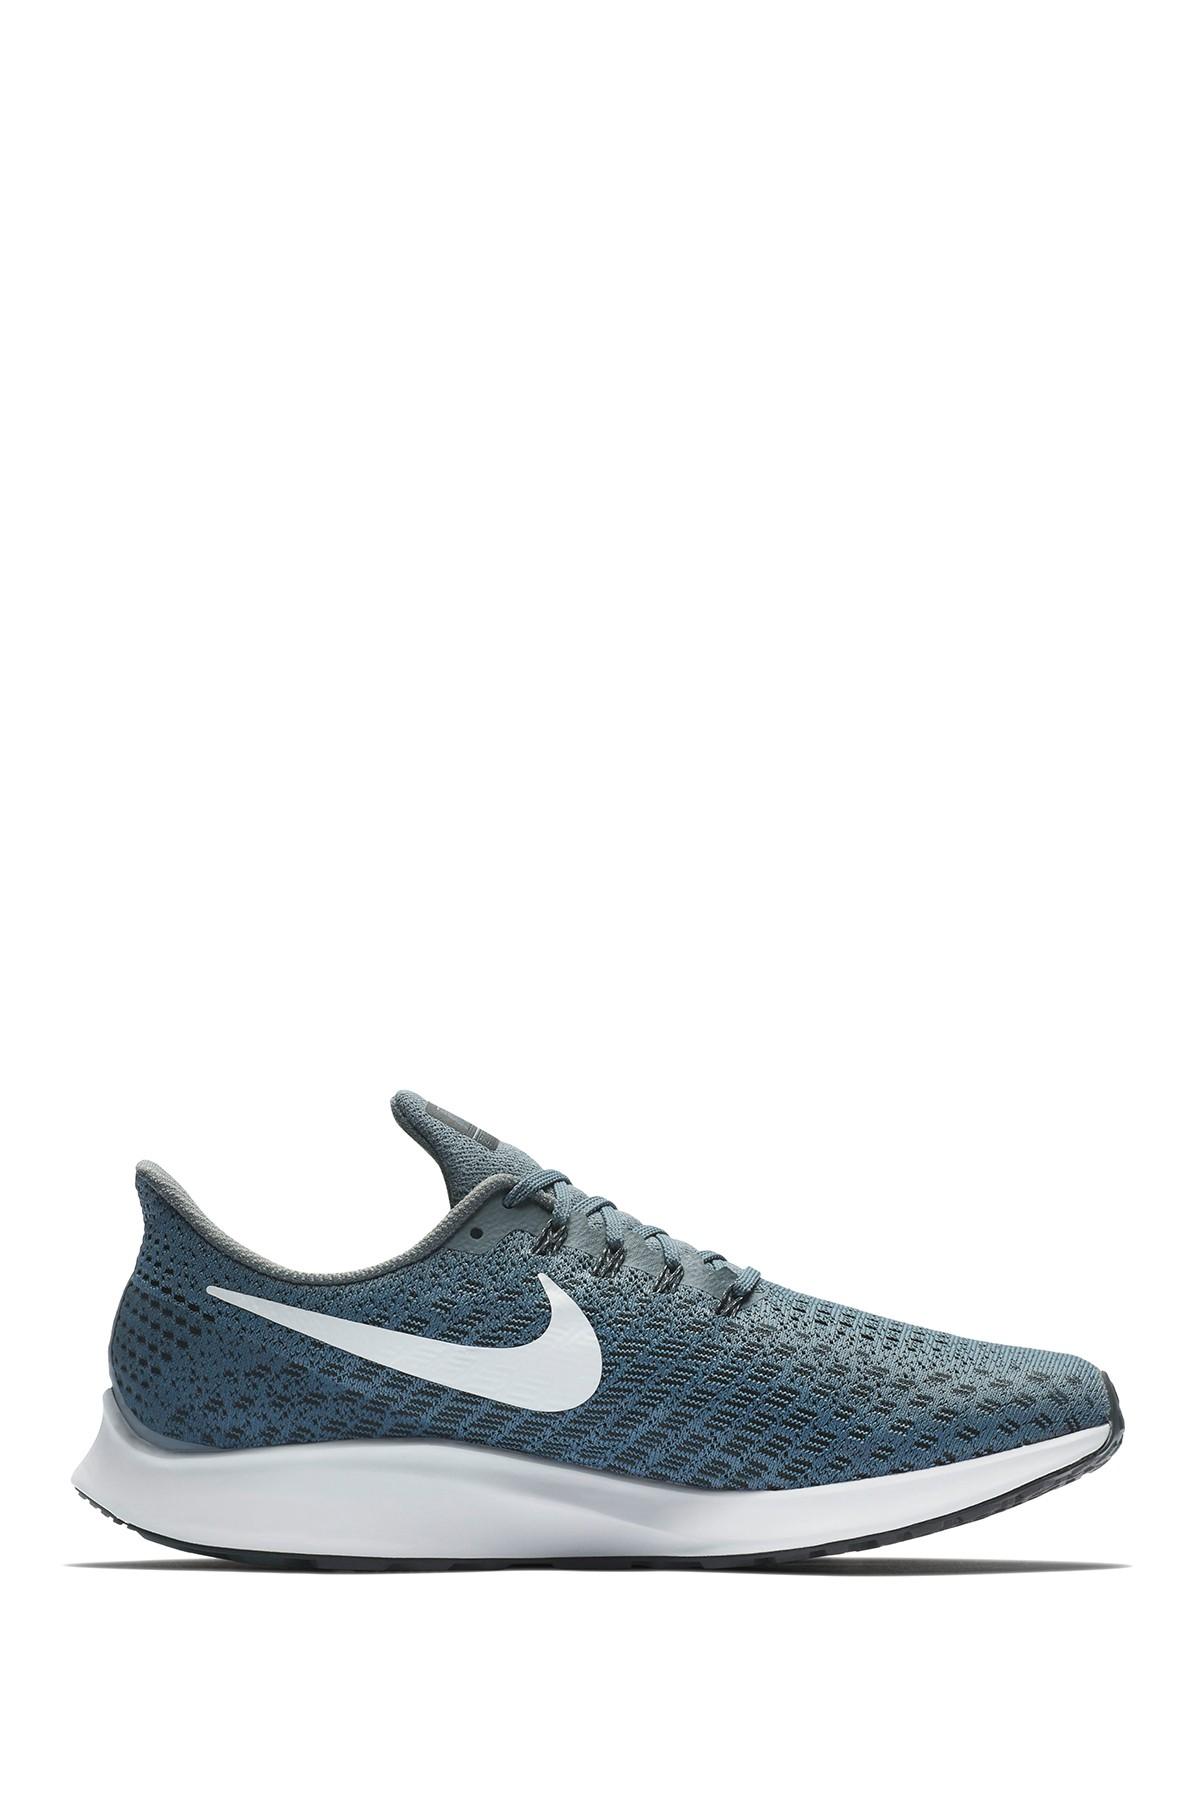 Nike Air Zoom Pegasus 35 Running Shoe - Extra Wide Width in Blue for Men -  Lyst